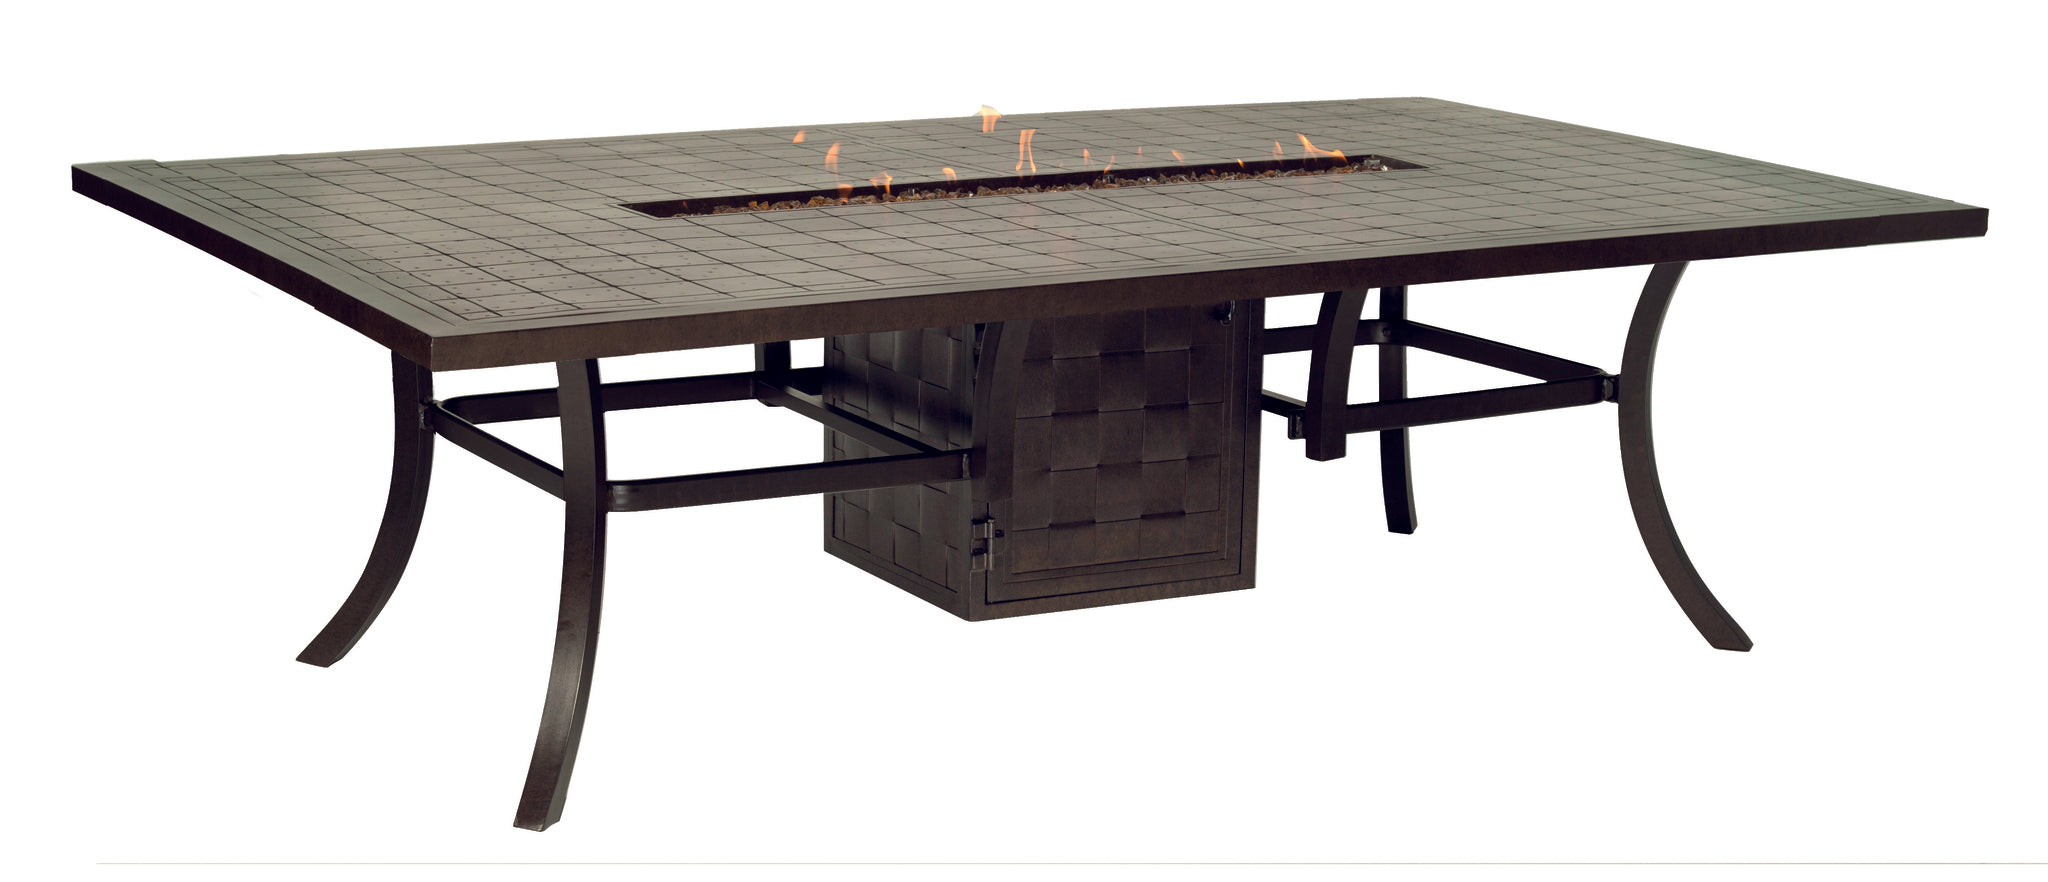 Castelle Classical 64" x 96" Rectangular Fire Pit Dining Table with Dynasty Top and Antique Dark Rum Finish 12011467